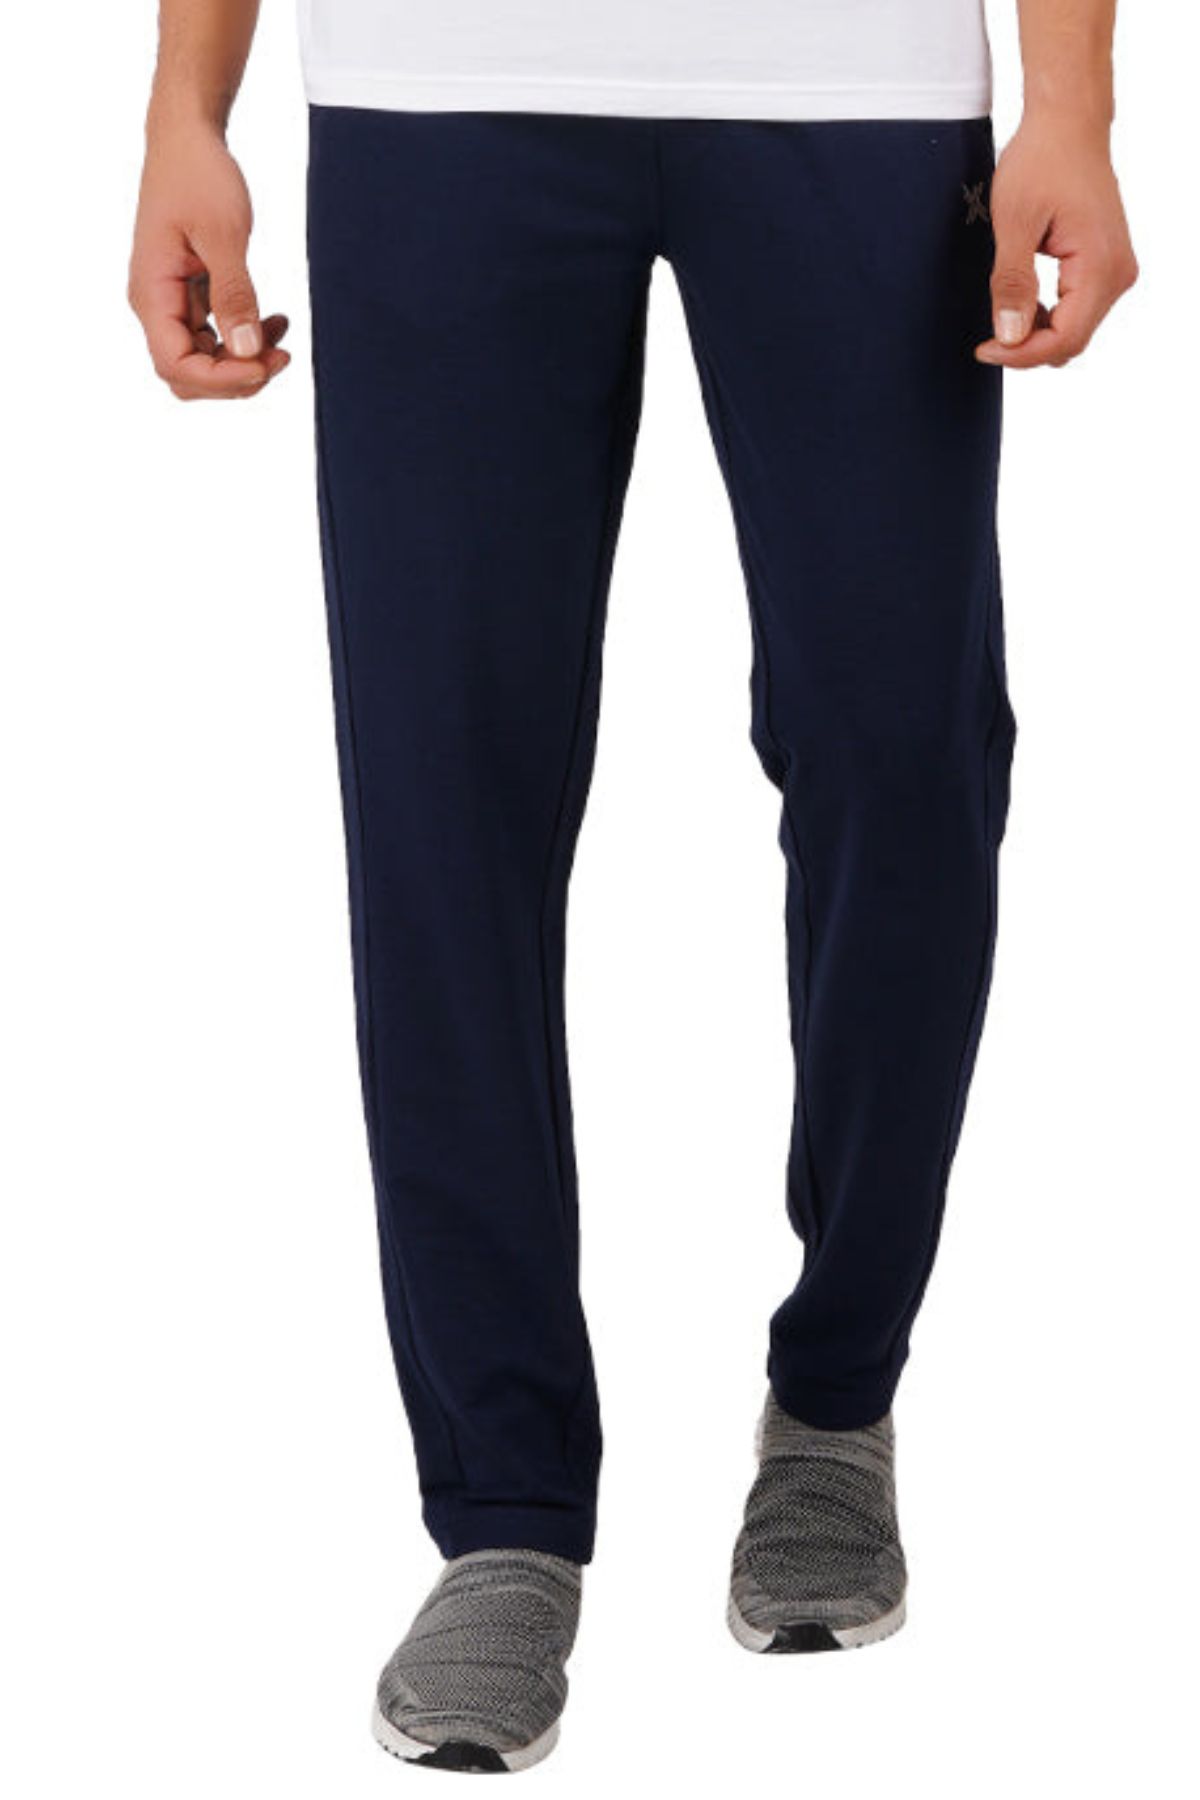 BRANDED LOWER Hosiery, Cotton, Knitted Hot Pant for Men | Udaan - B2B  Buying for Retailers